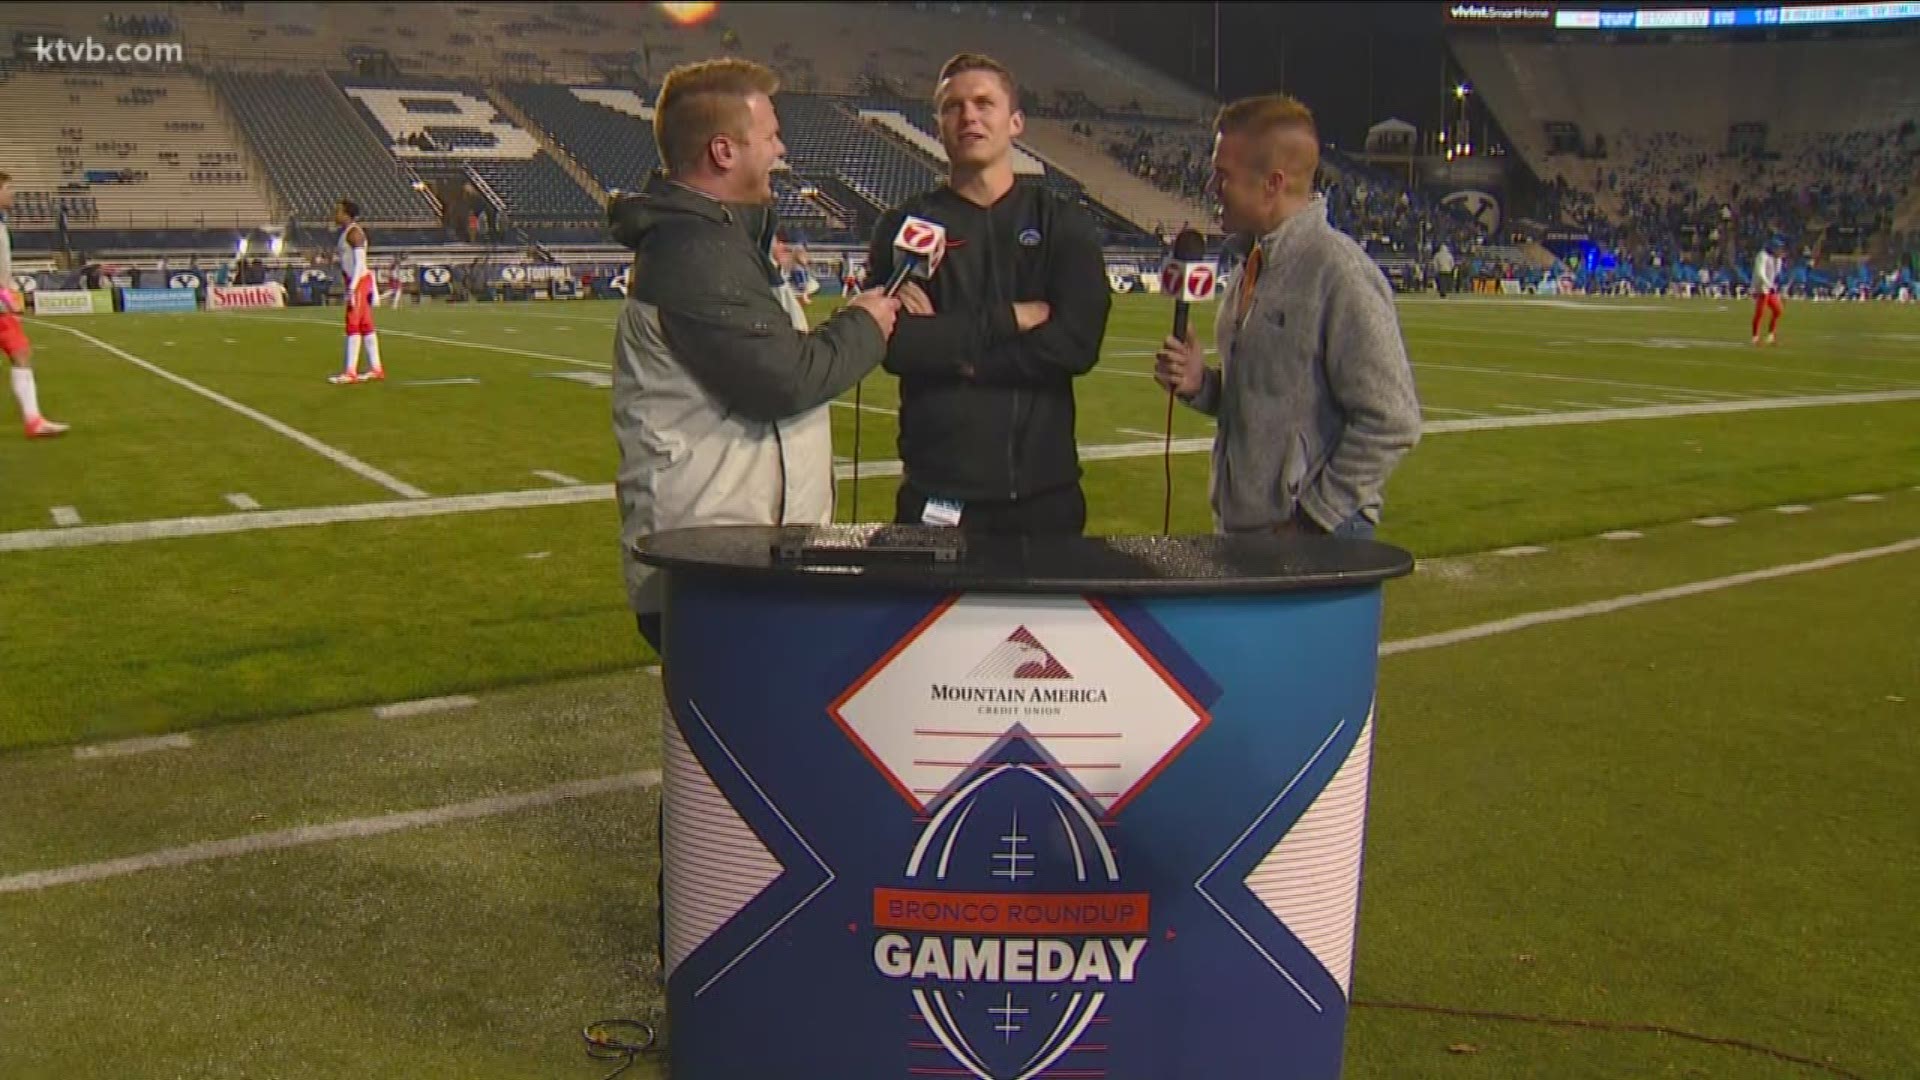 The former Boise State star quarterback joins the pregame show to break down the Broncos' QB situation and the rivalry with BYU.